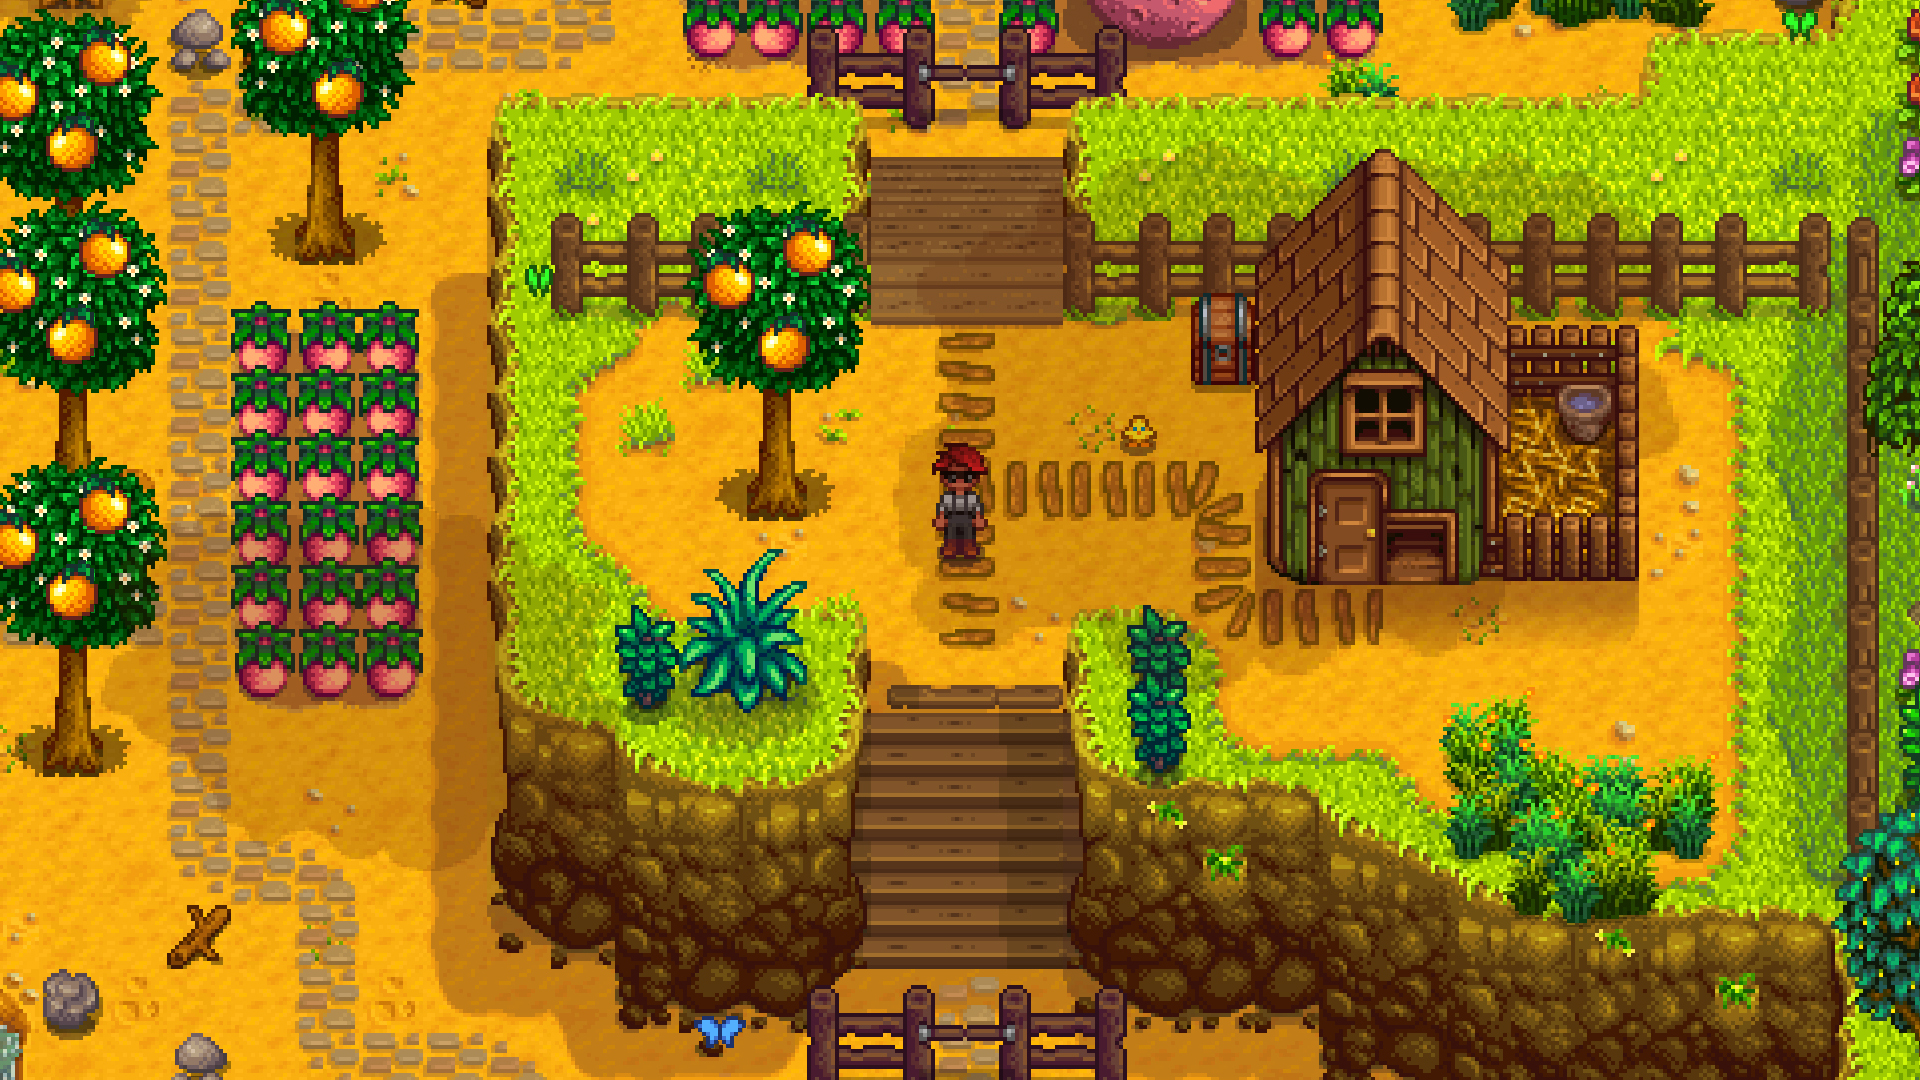 New Stardew Valley-Like Game Coming to PS5 and Xbox Series X Soon